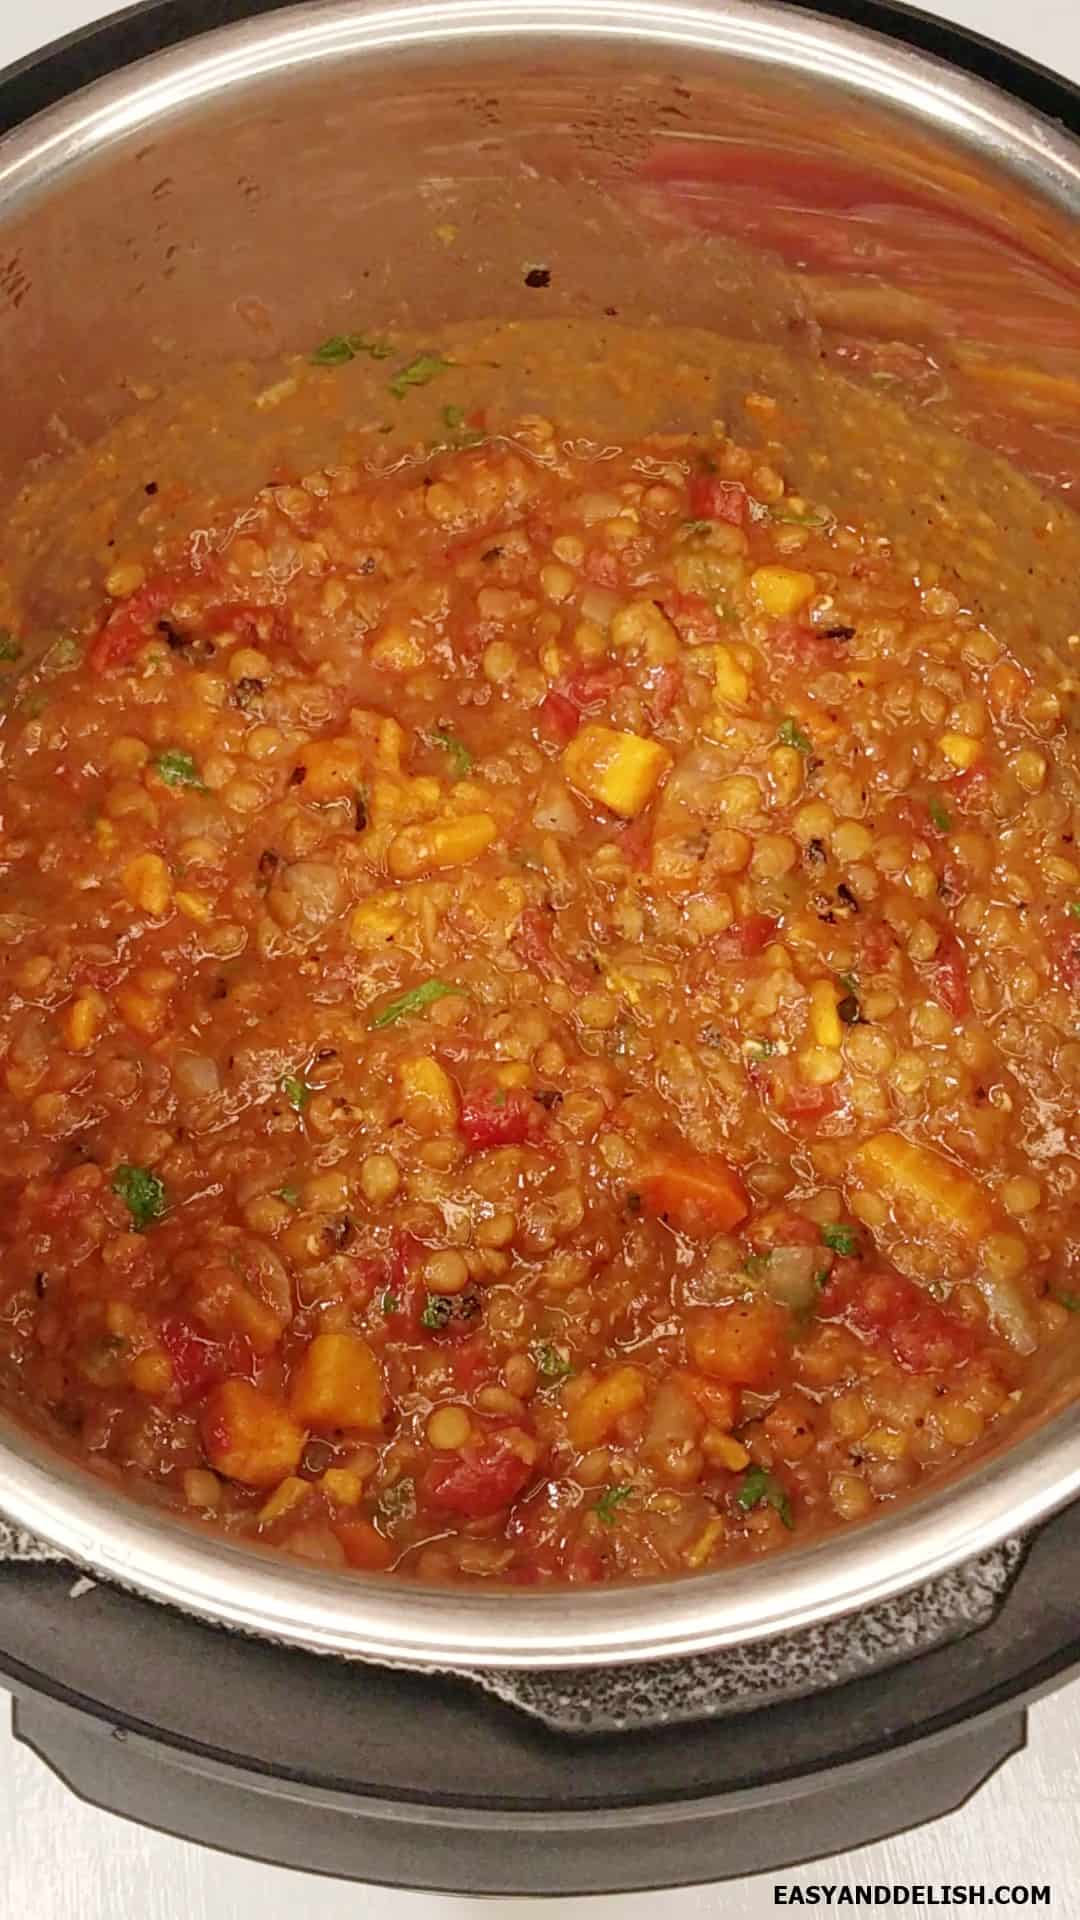 Cooked Moroccan lentil stew in the Instant Pot.